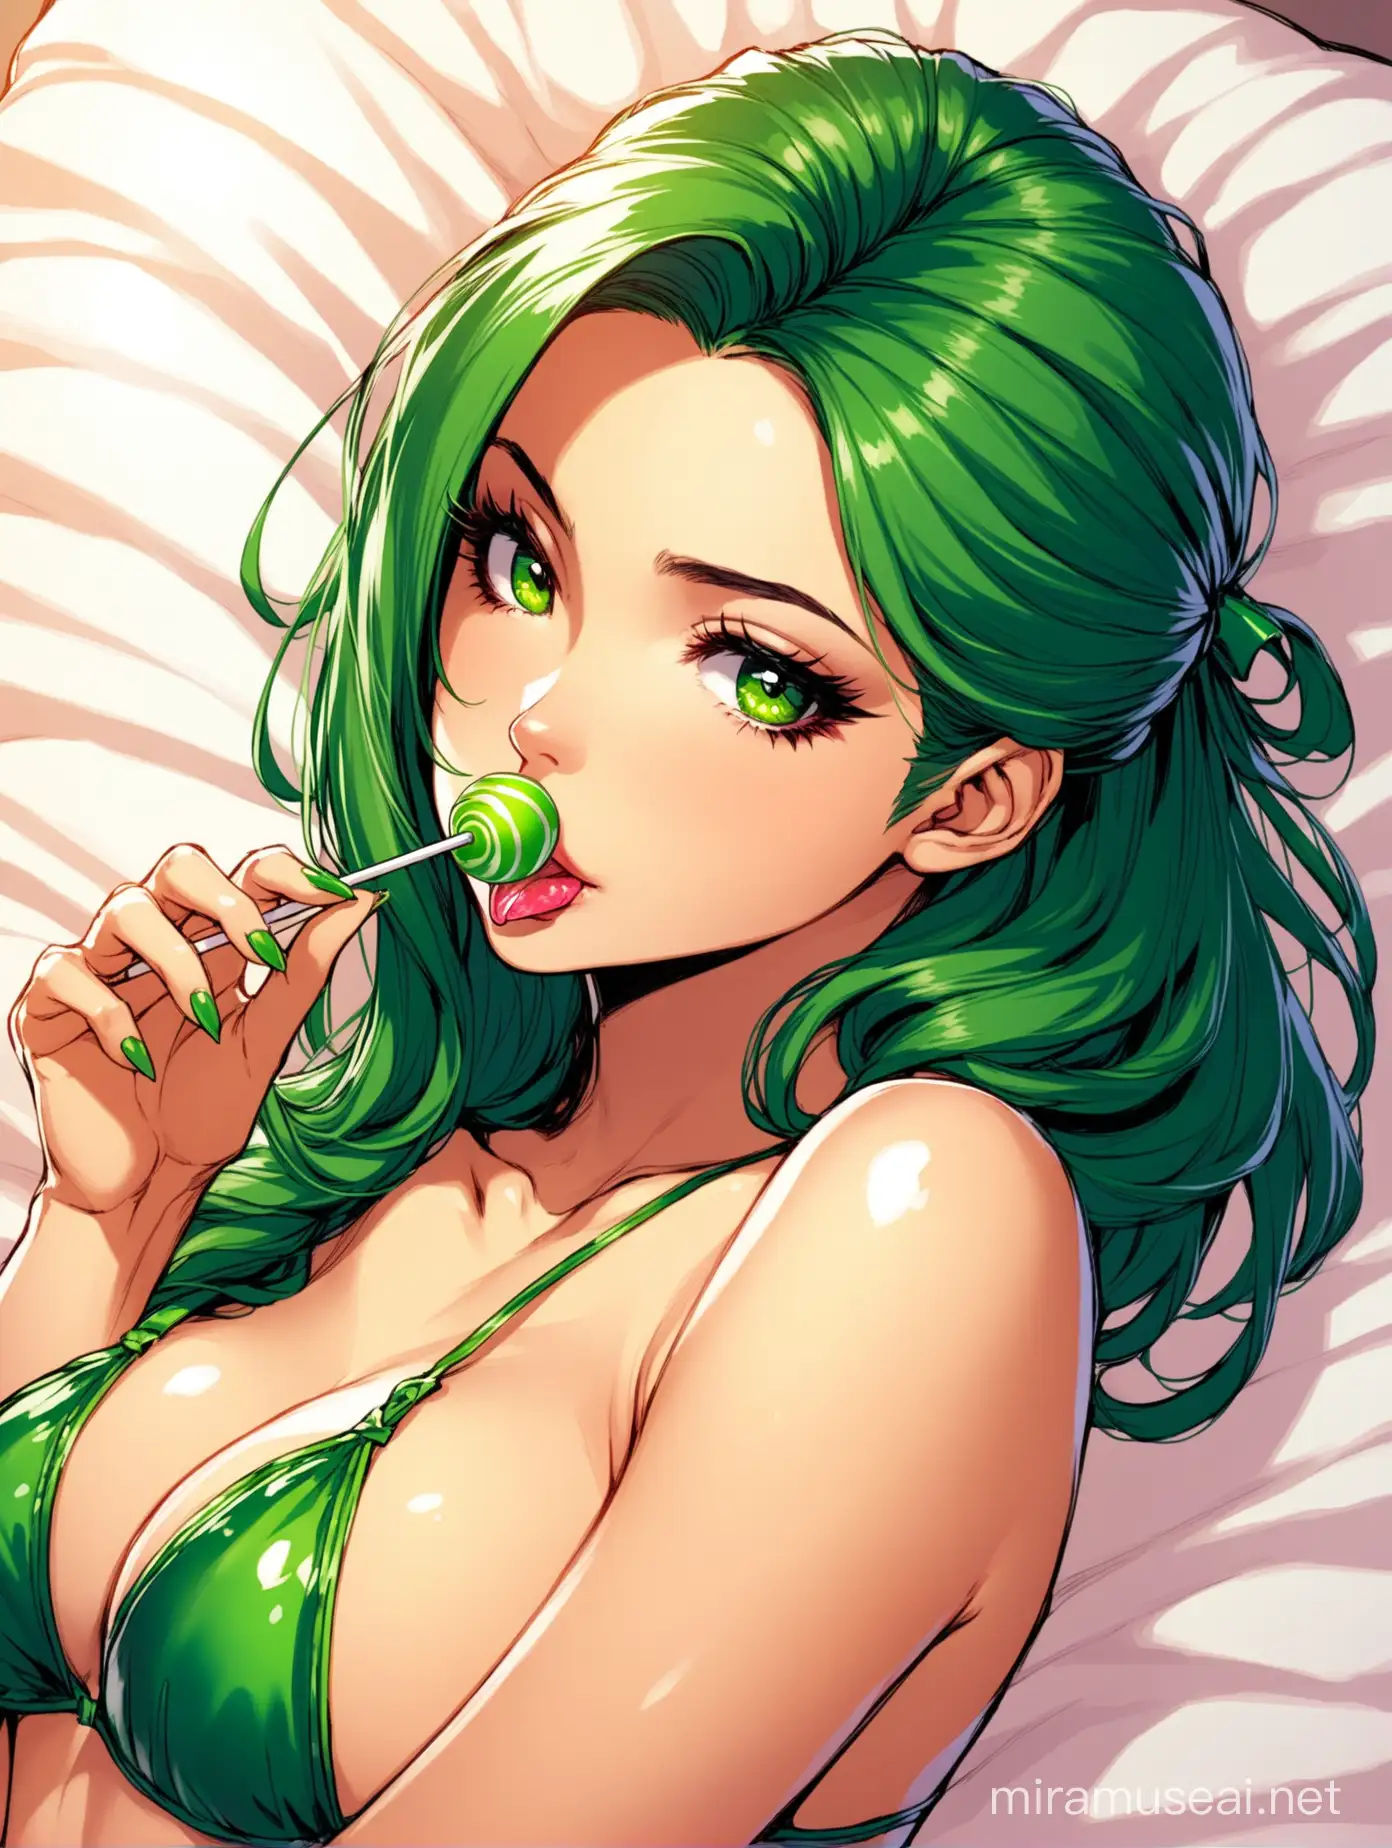 Seductive Rogue in Green Lingerie Licking Lollipop on Bed